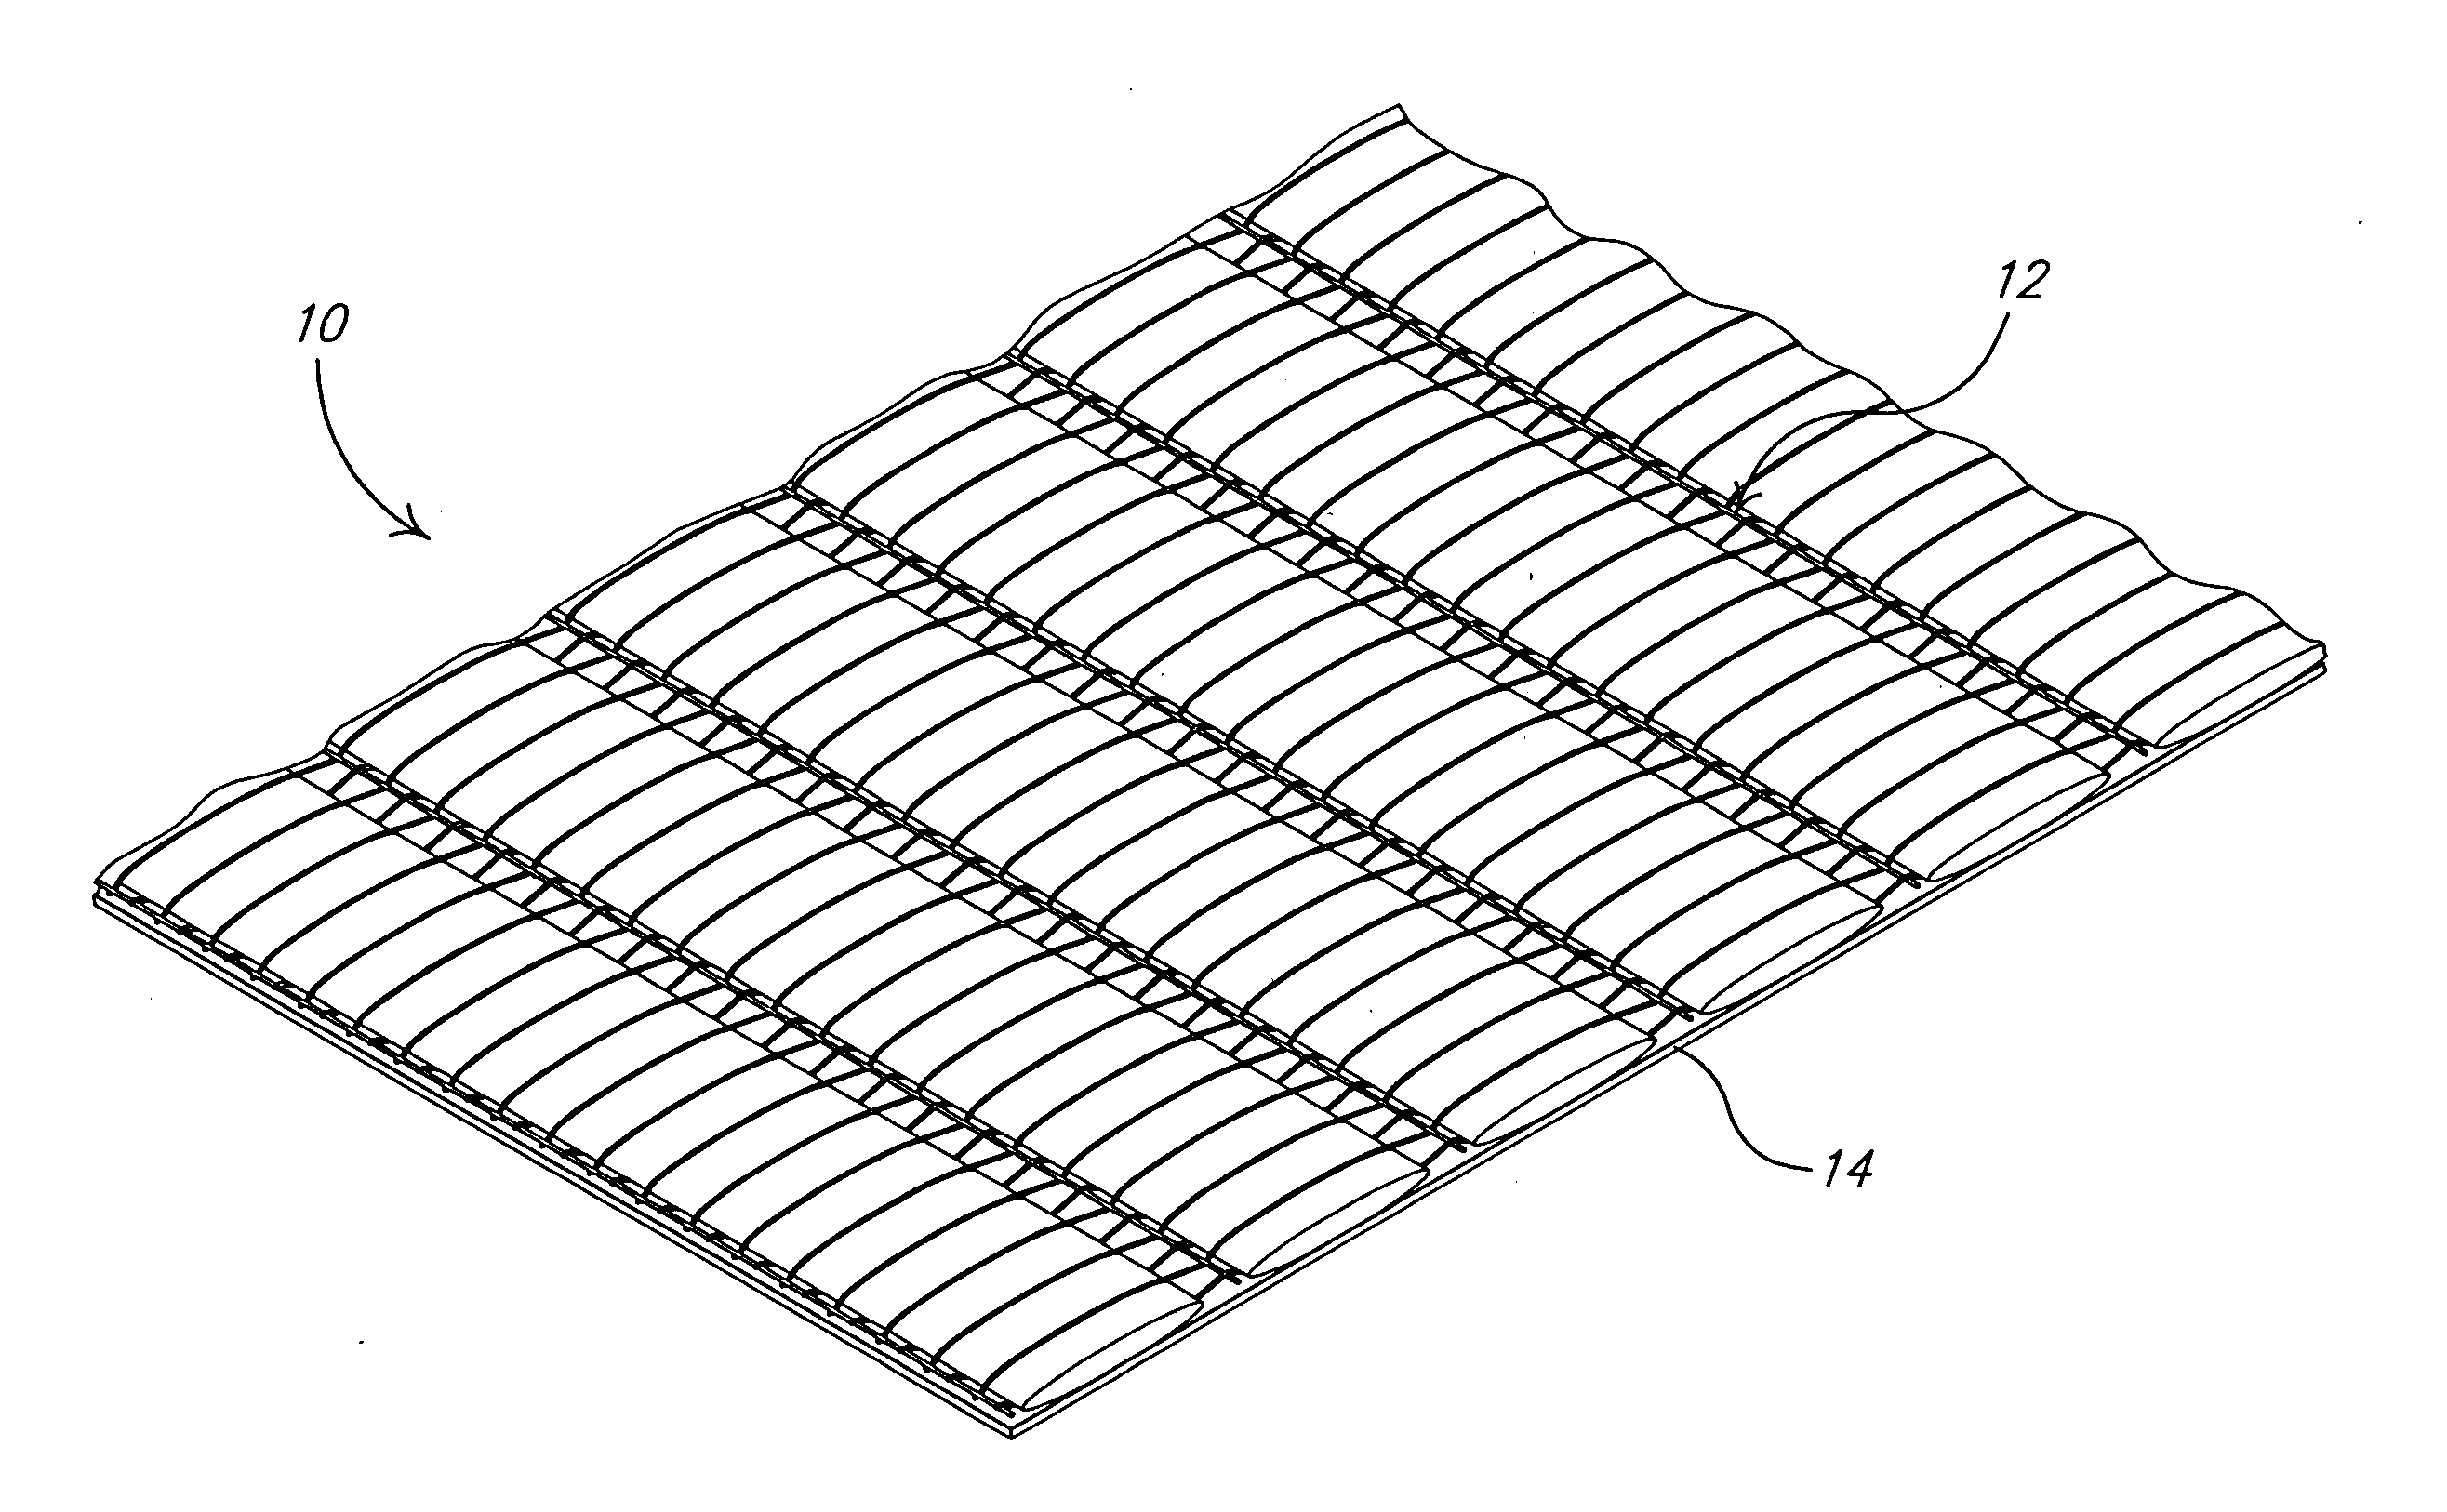 Toughened, non-crimped unidirectional fabric apparatus and method of making same